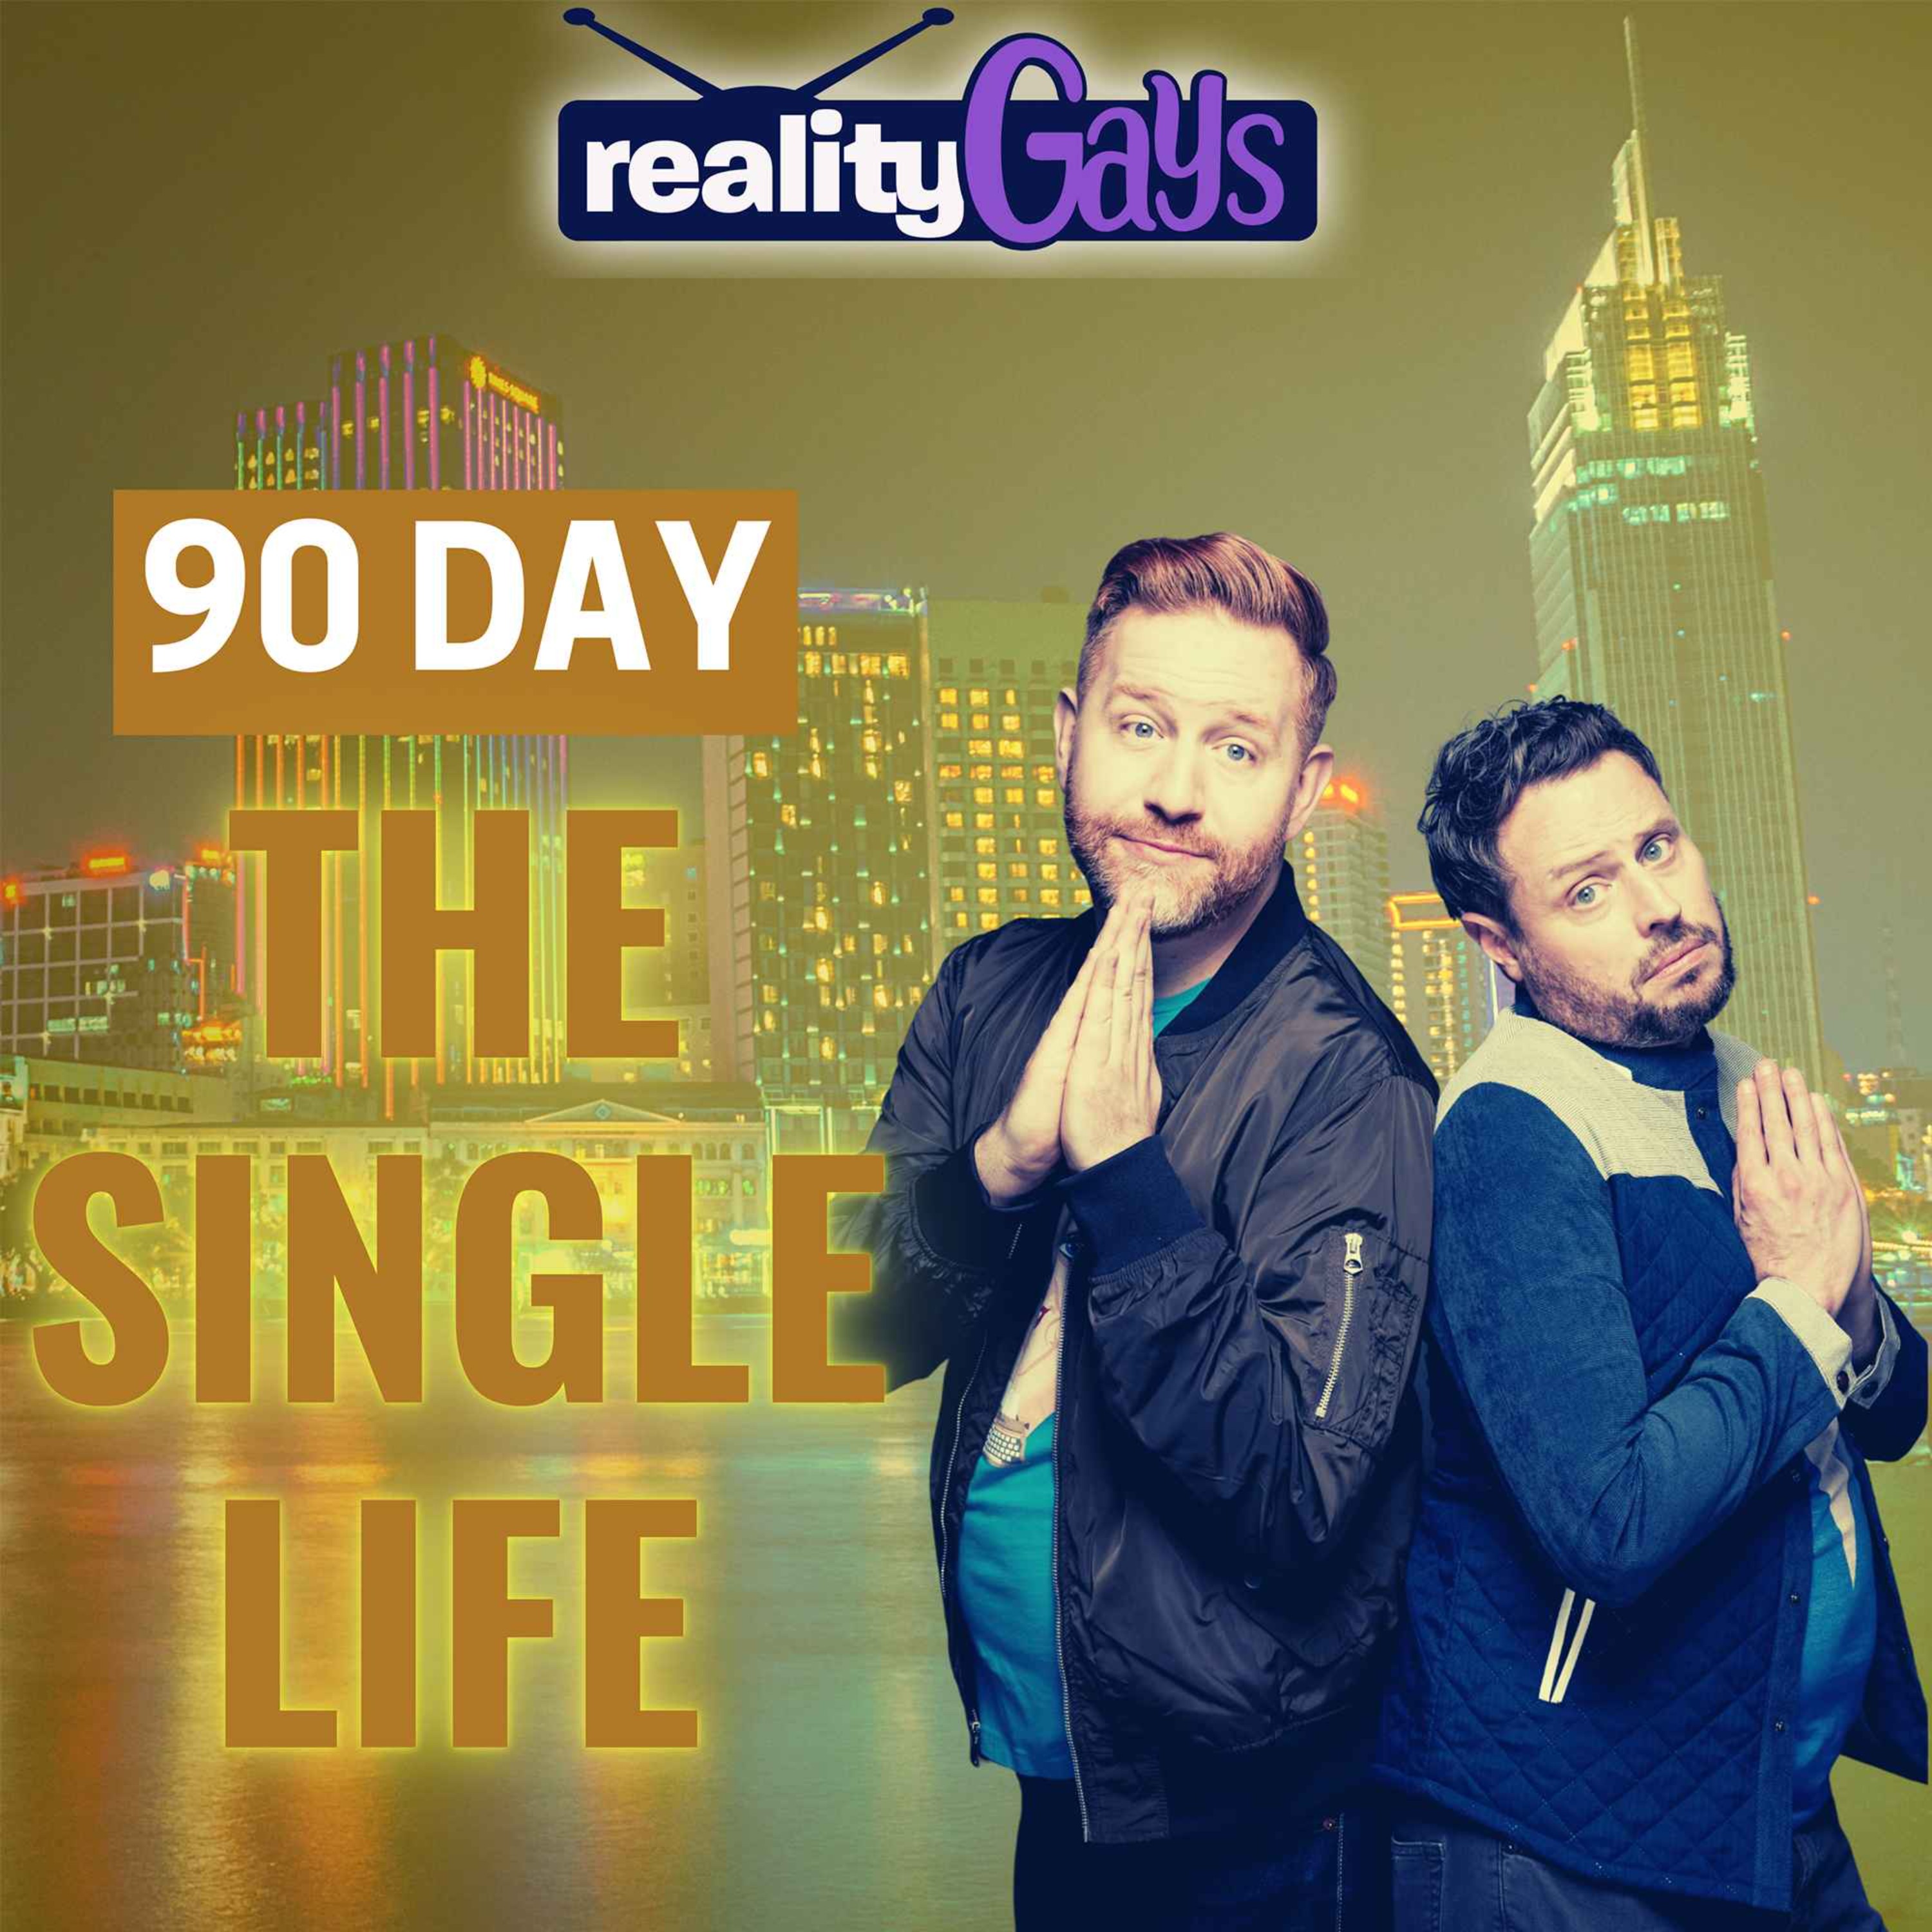 90 DAY FIANCÉ The Single Life 0314 "Tell All Part 3" Reality Gays